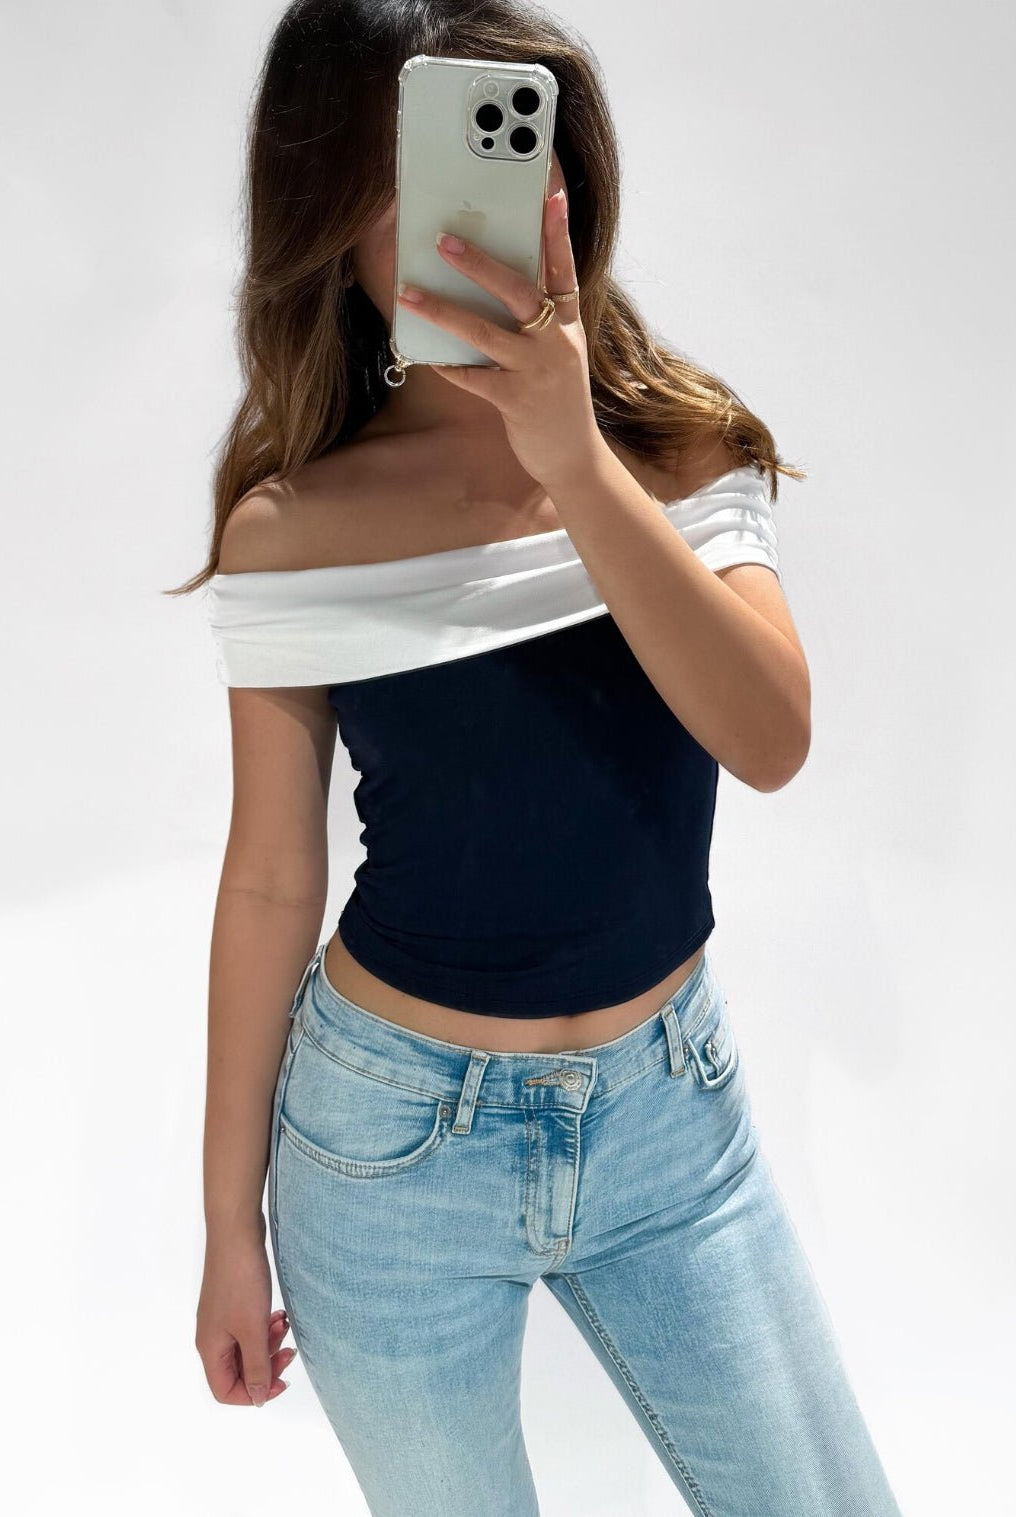 MOLLY TOP NAVY AND WHITE - My Favourites